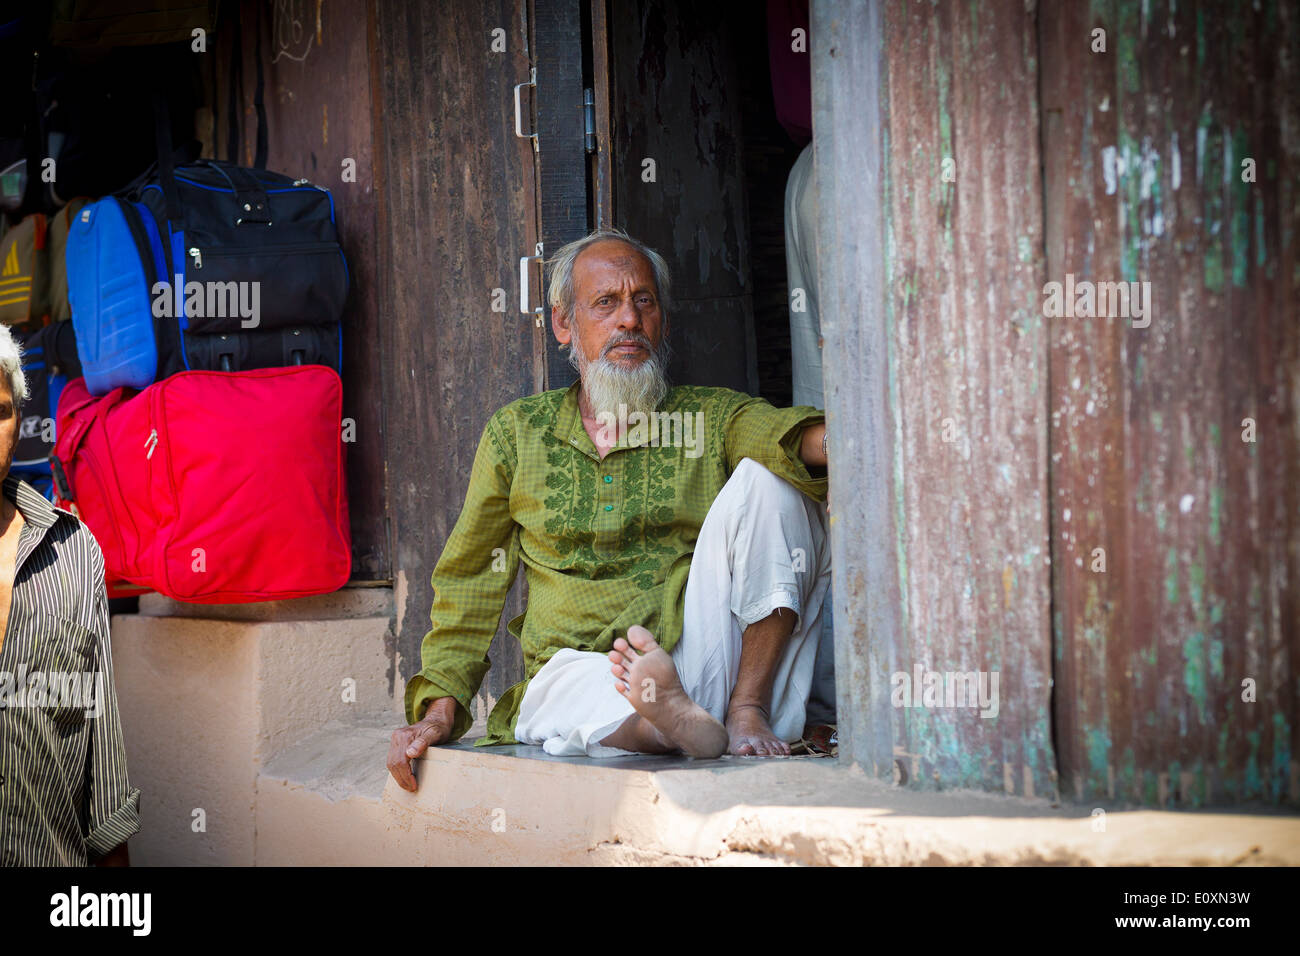 Old Indian gentlemen with a Grey beard sitting by his stall, Mumbai India Stock Photo